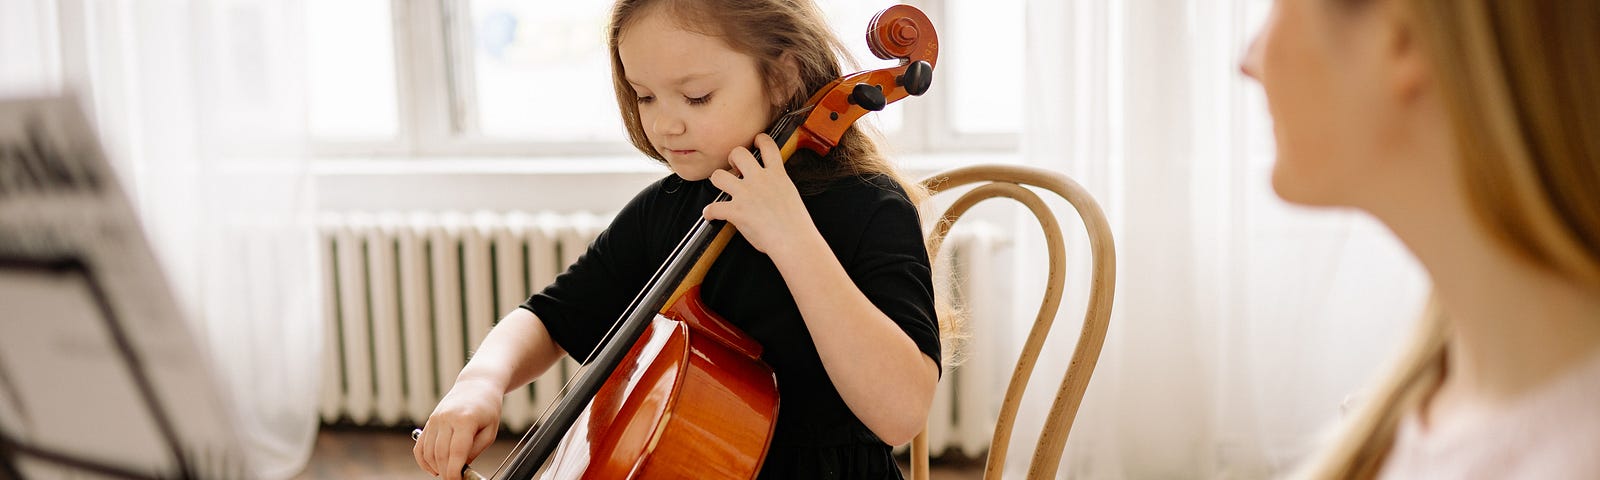 A young girl playing cello in a bright sunlit room. On the right side of the photo, an adult woman is watching her.